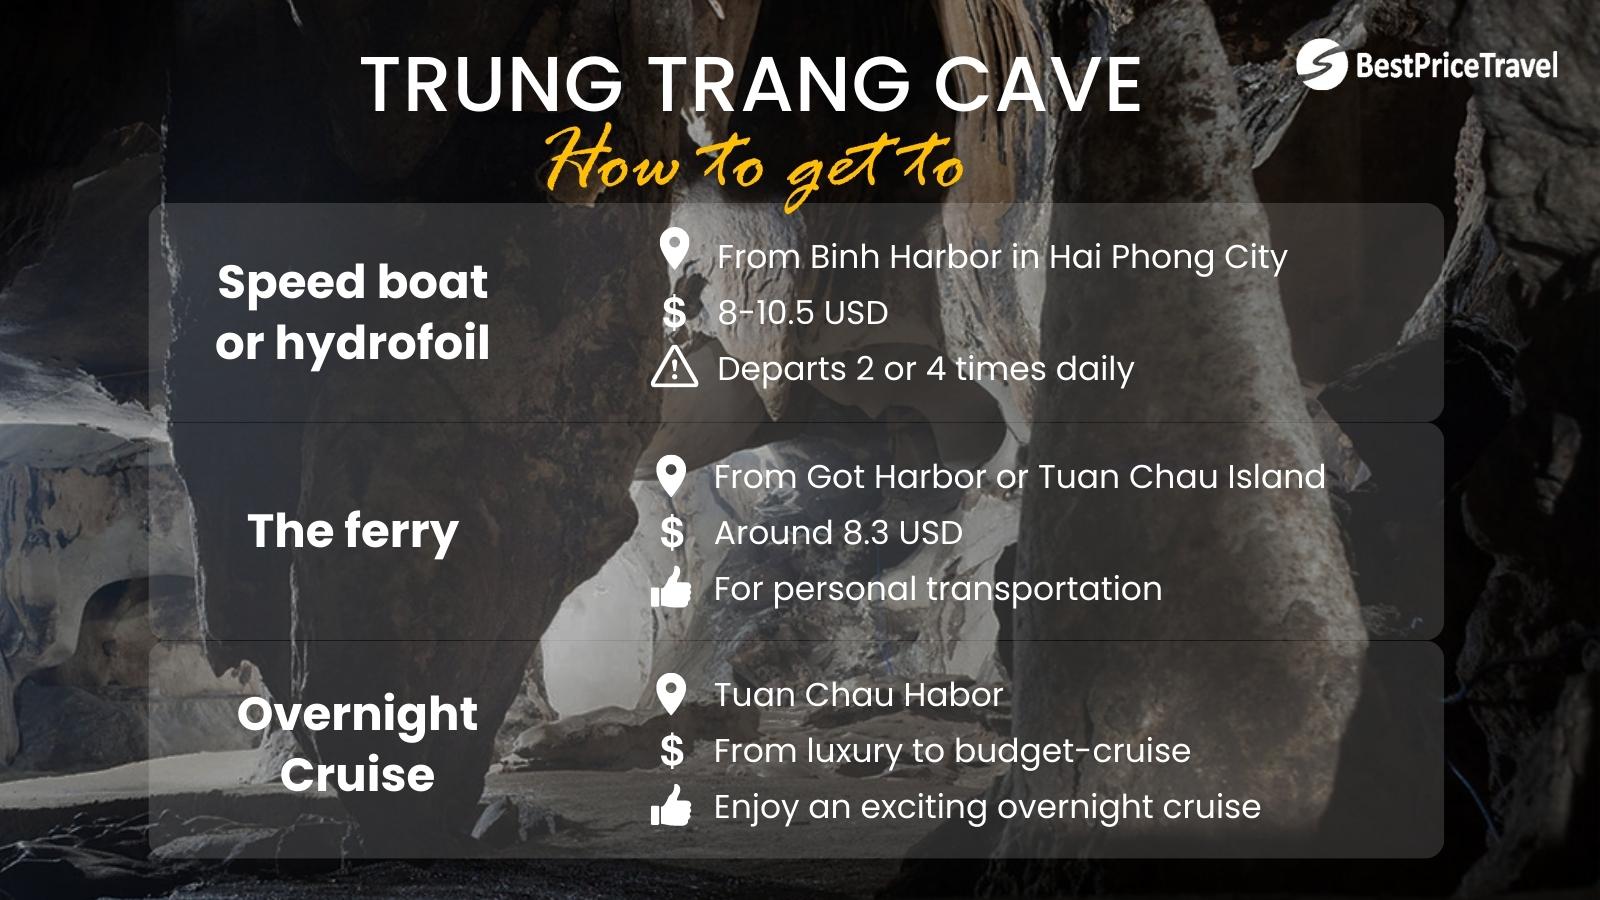 How To Get To Trung Trang Cave